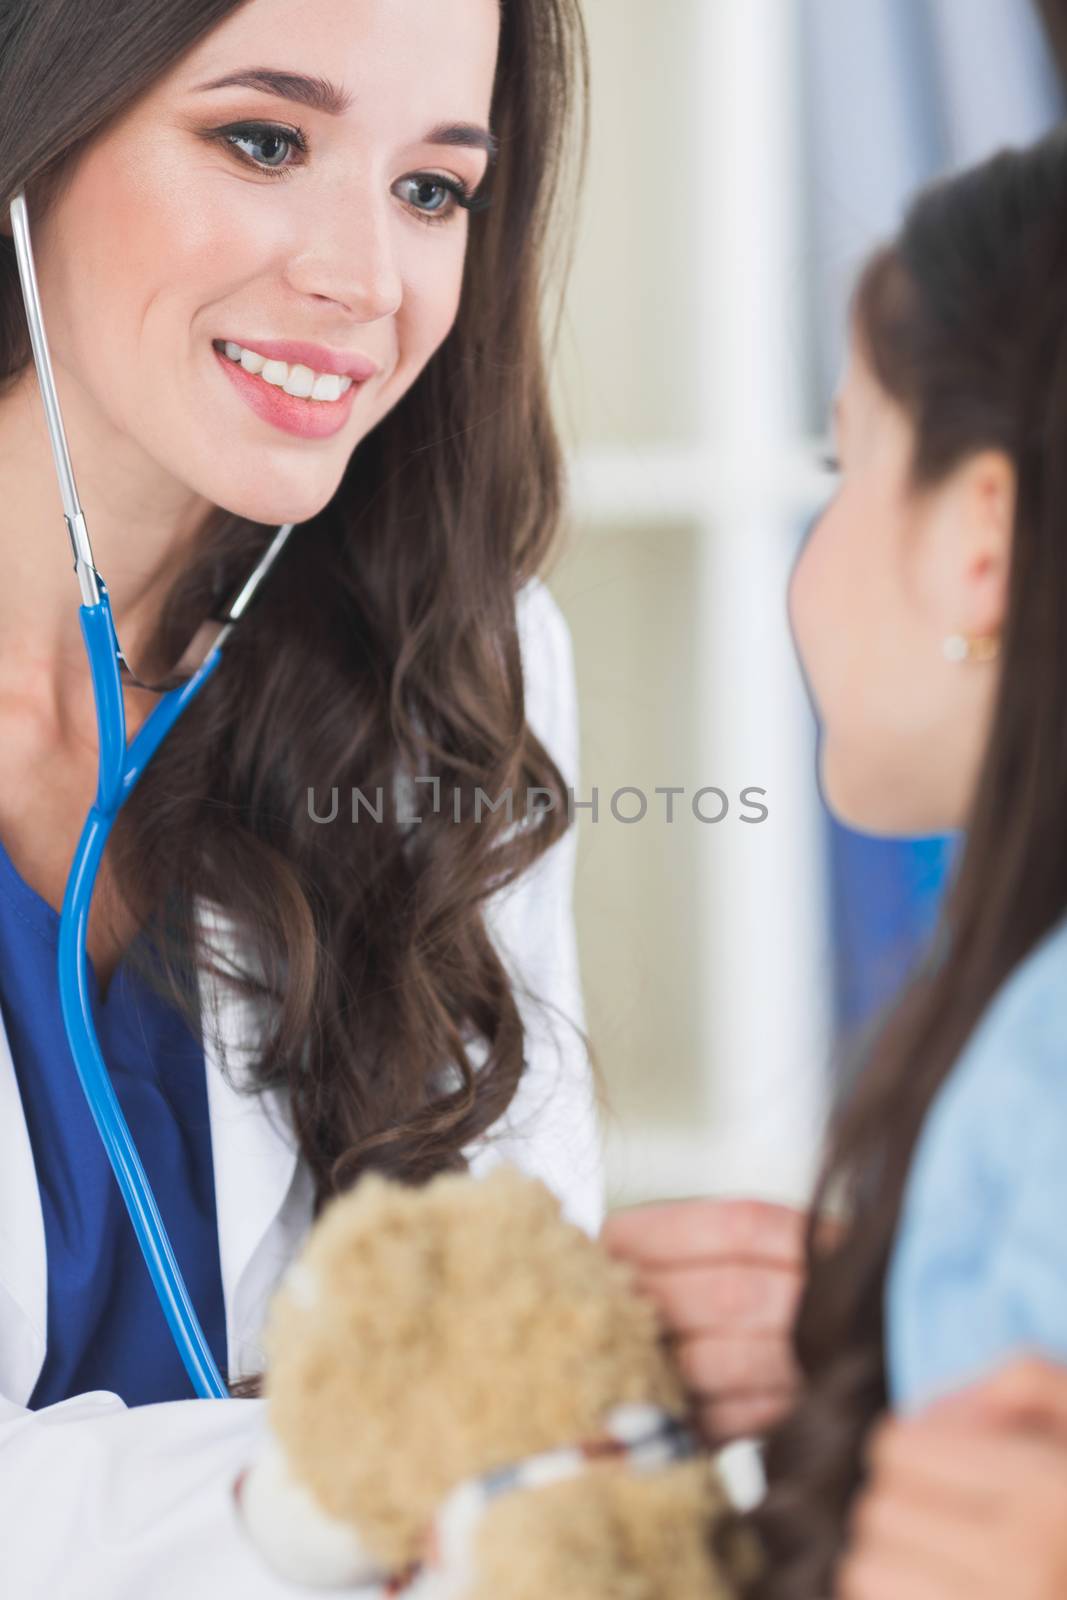 Beautiful female pediatrician doctor examining child with teddy bear in office